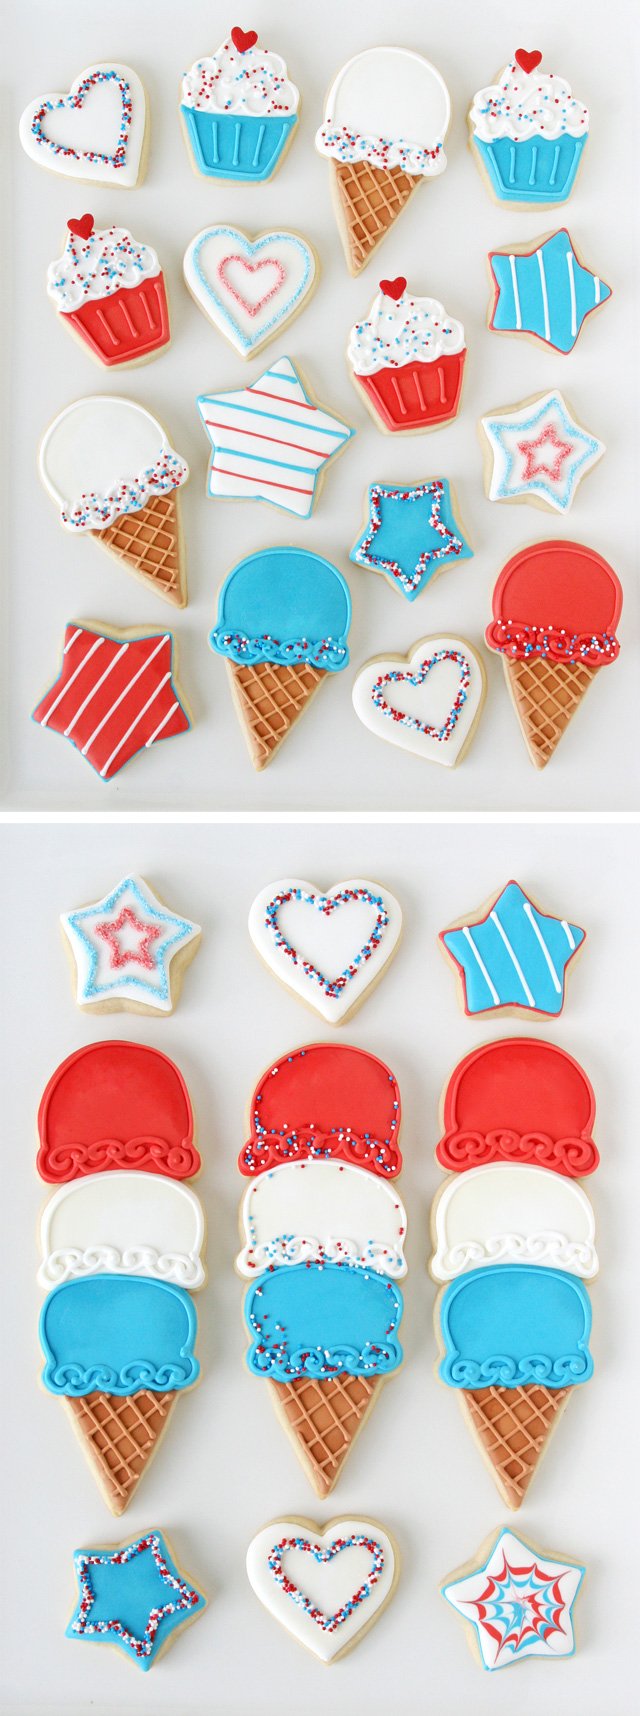 4th of July Cookies - GloriousTreats.com